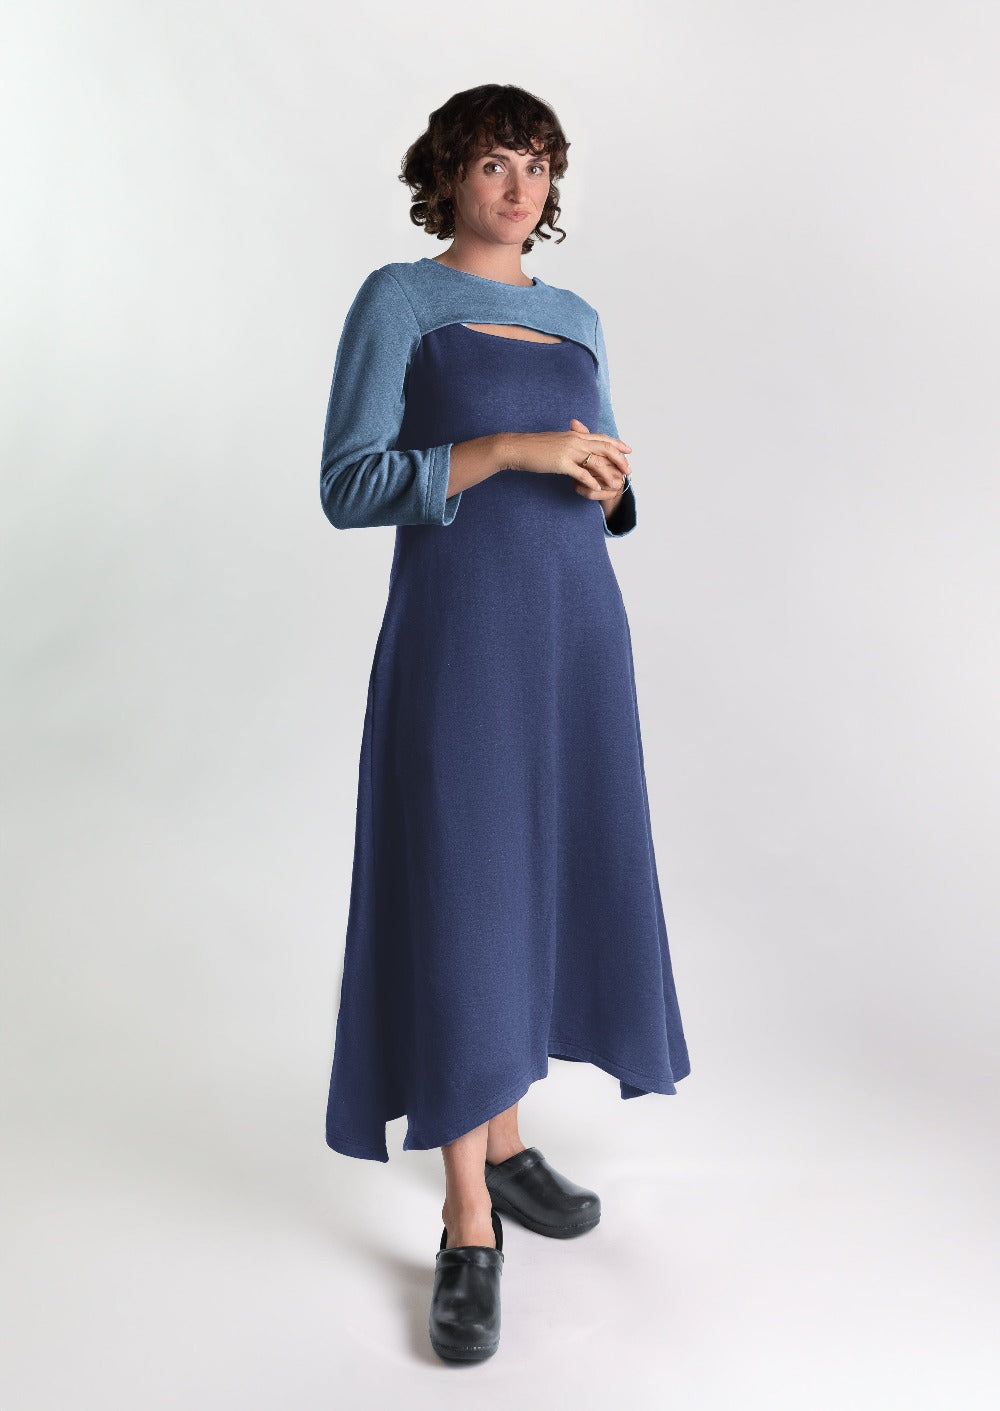 Woman is a cozy stylish dress that is chest port accessible for infusions. 